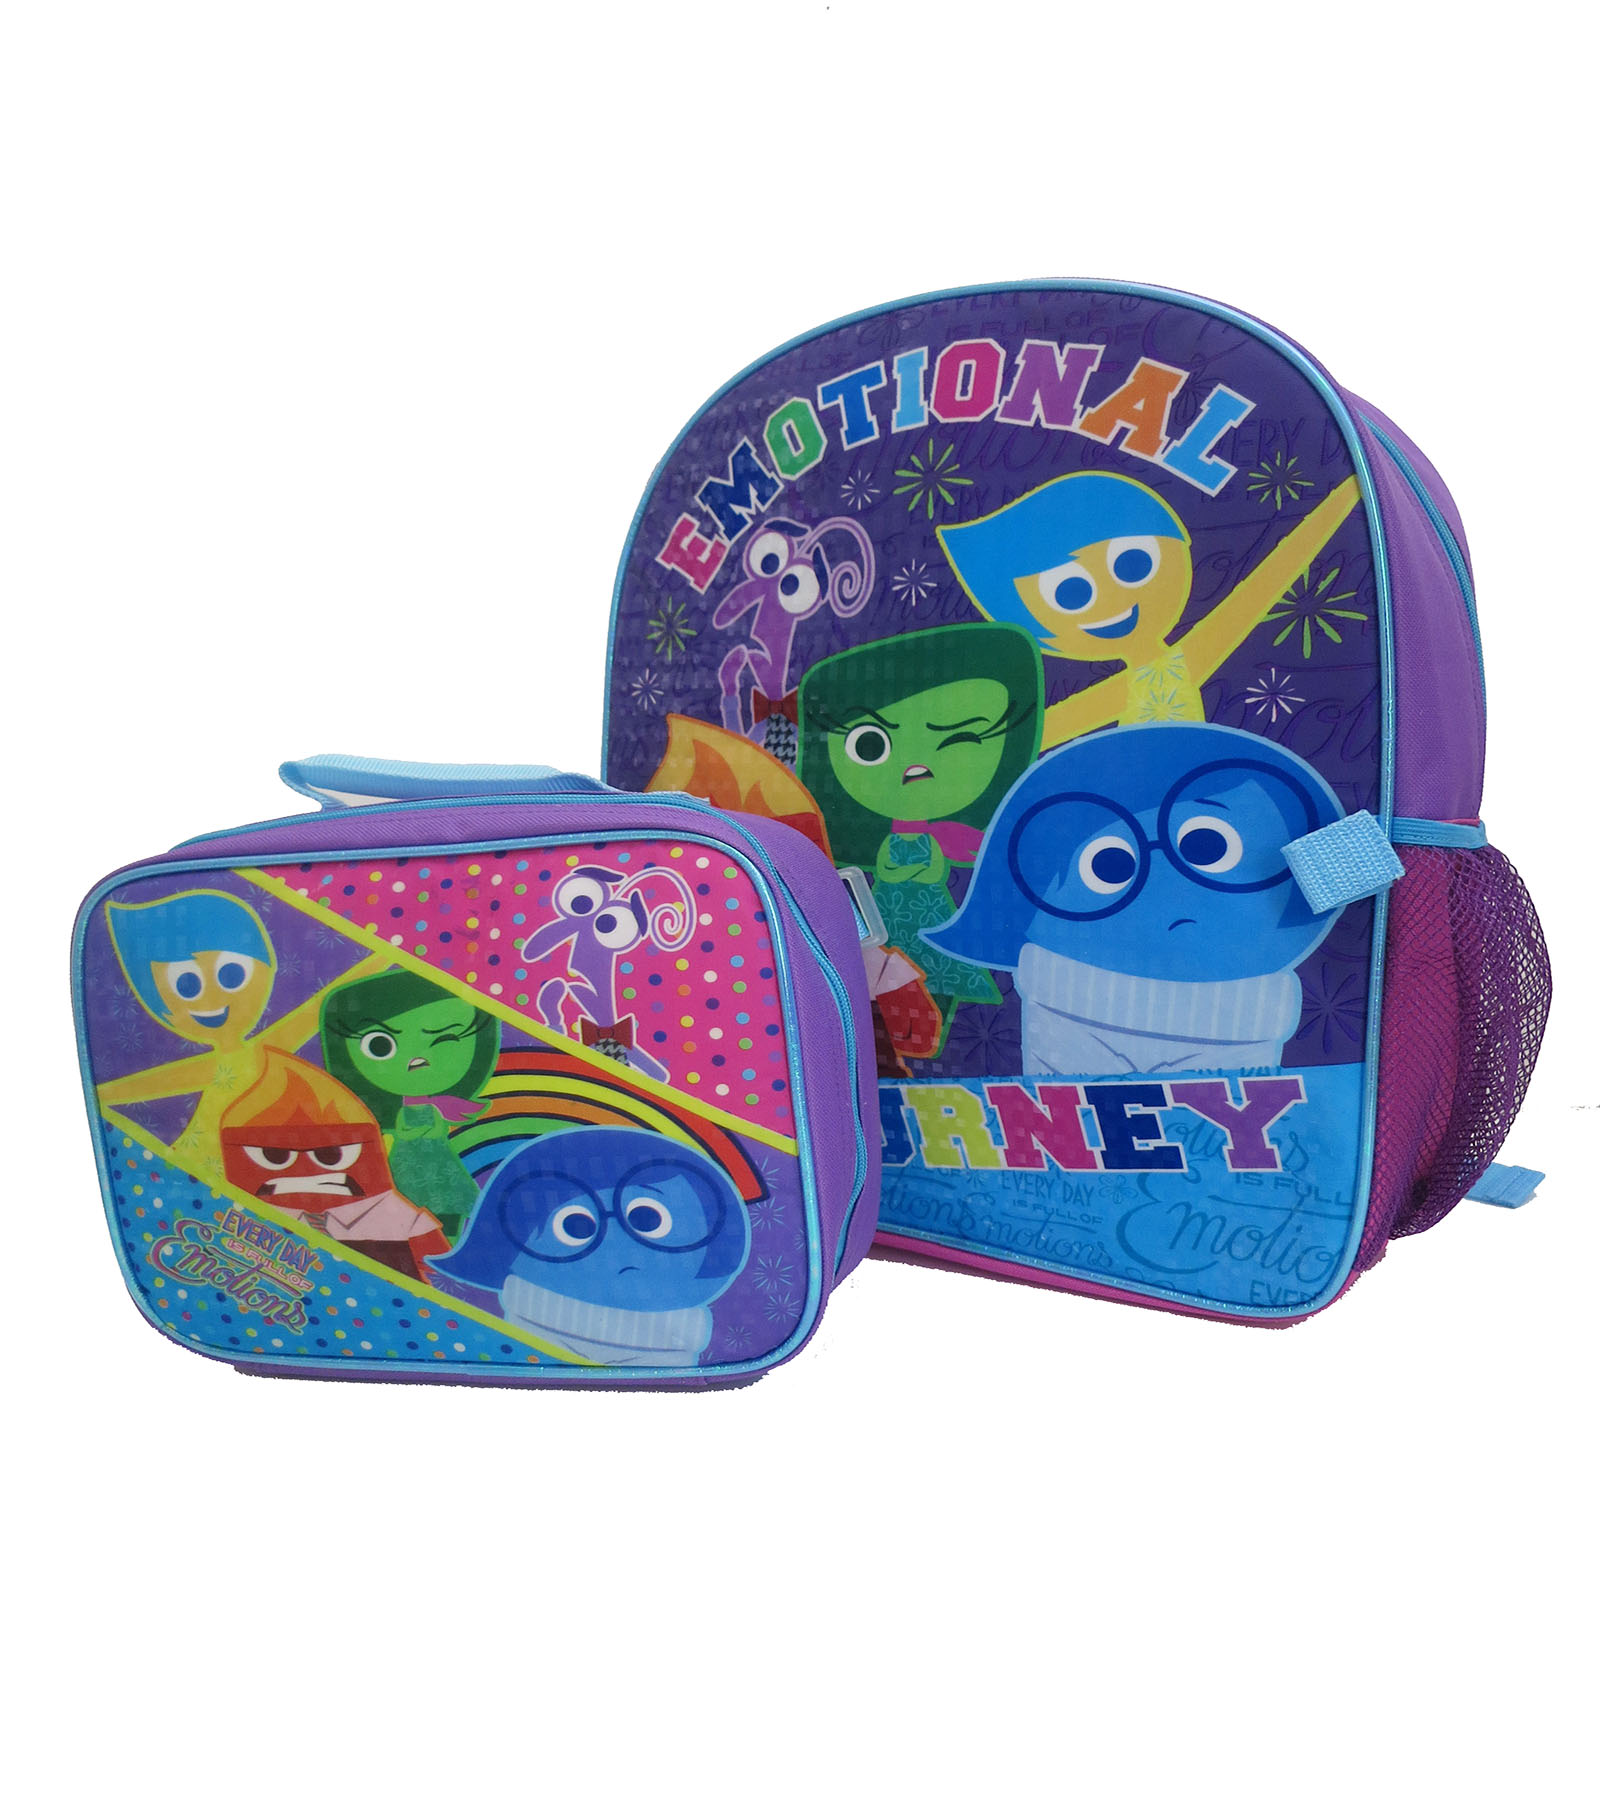 Disney Inside Out Backpack w/ Lunch Tote $10.00